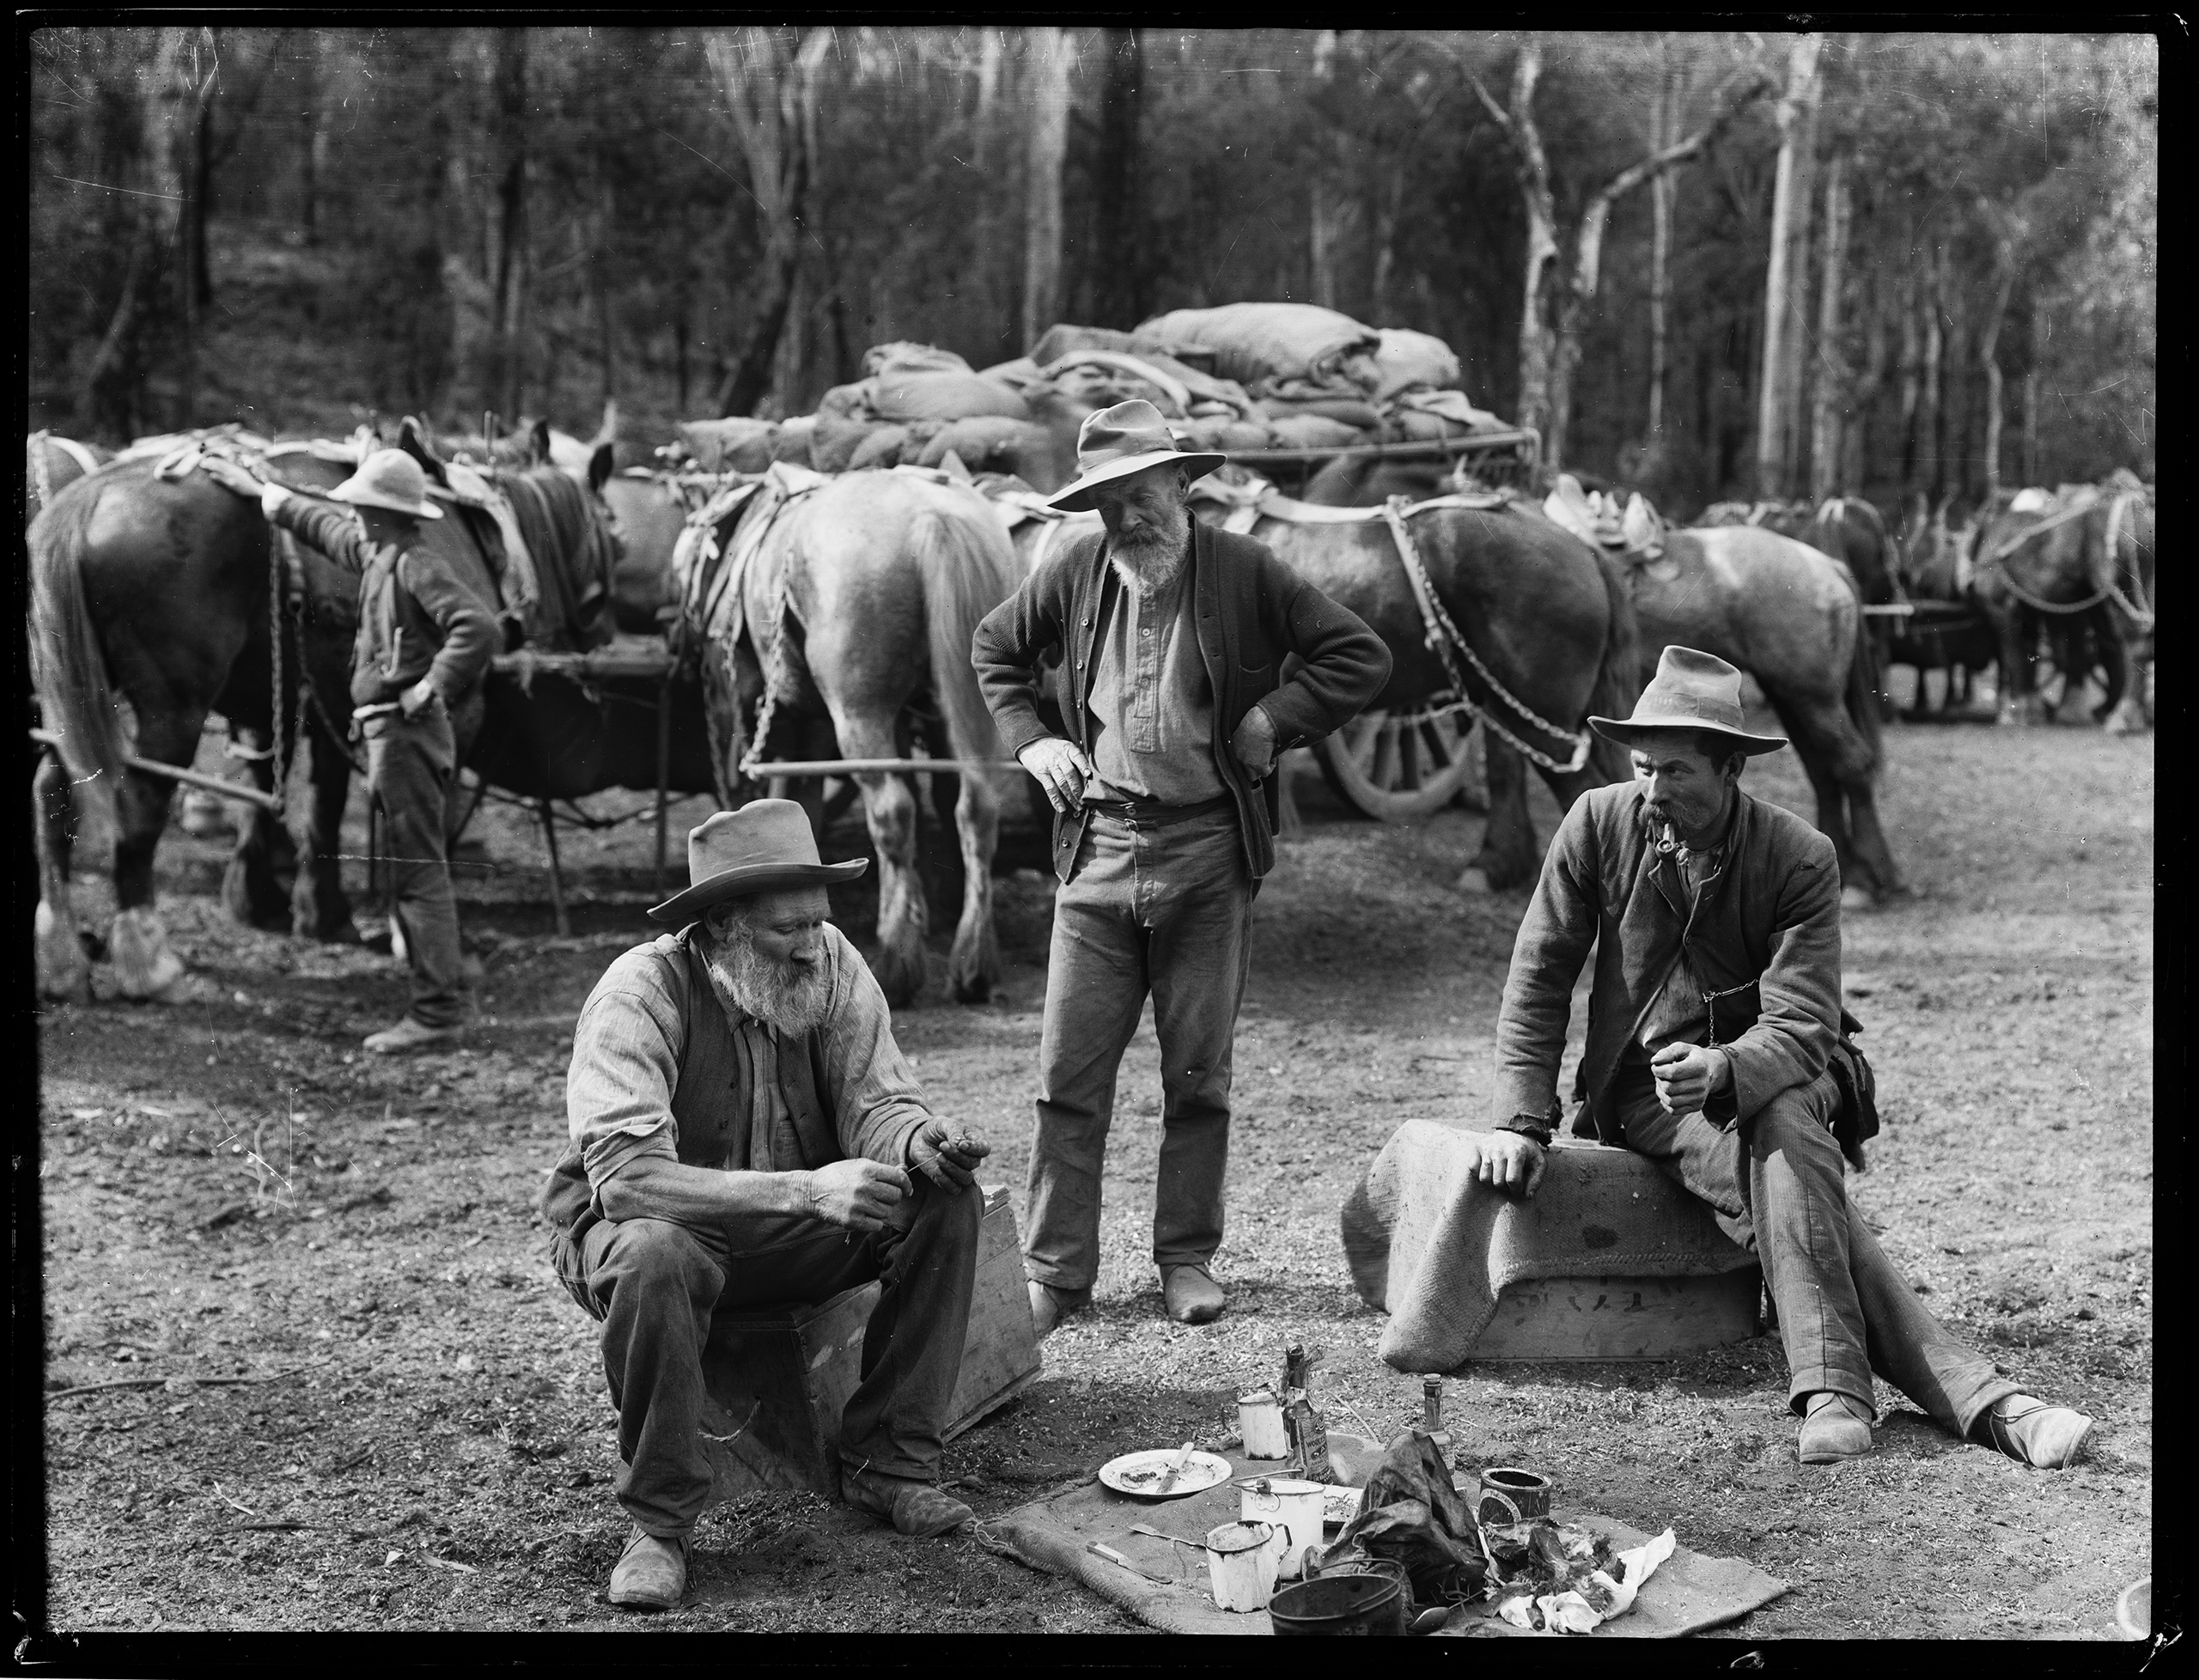 Glass plate negative, 'Meal Break for Teamsters and Horses' by unattributed studio, Tyrrell Collection